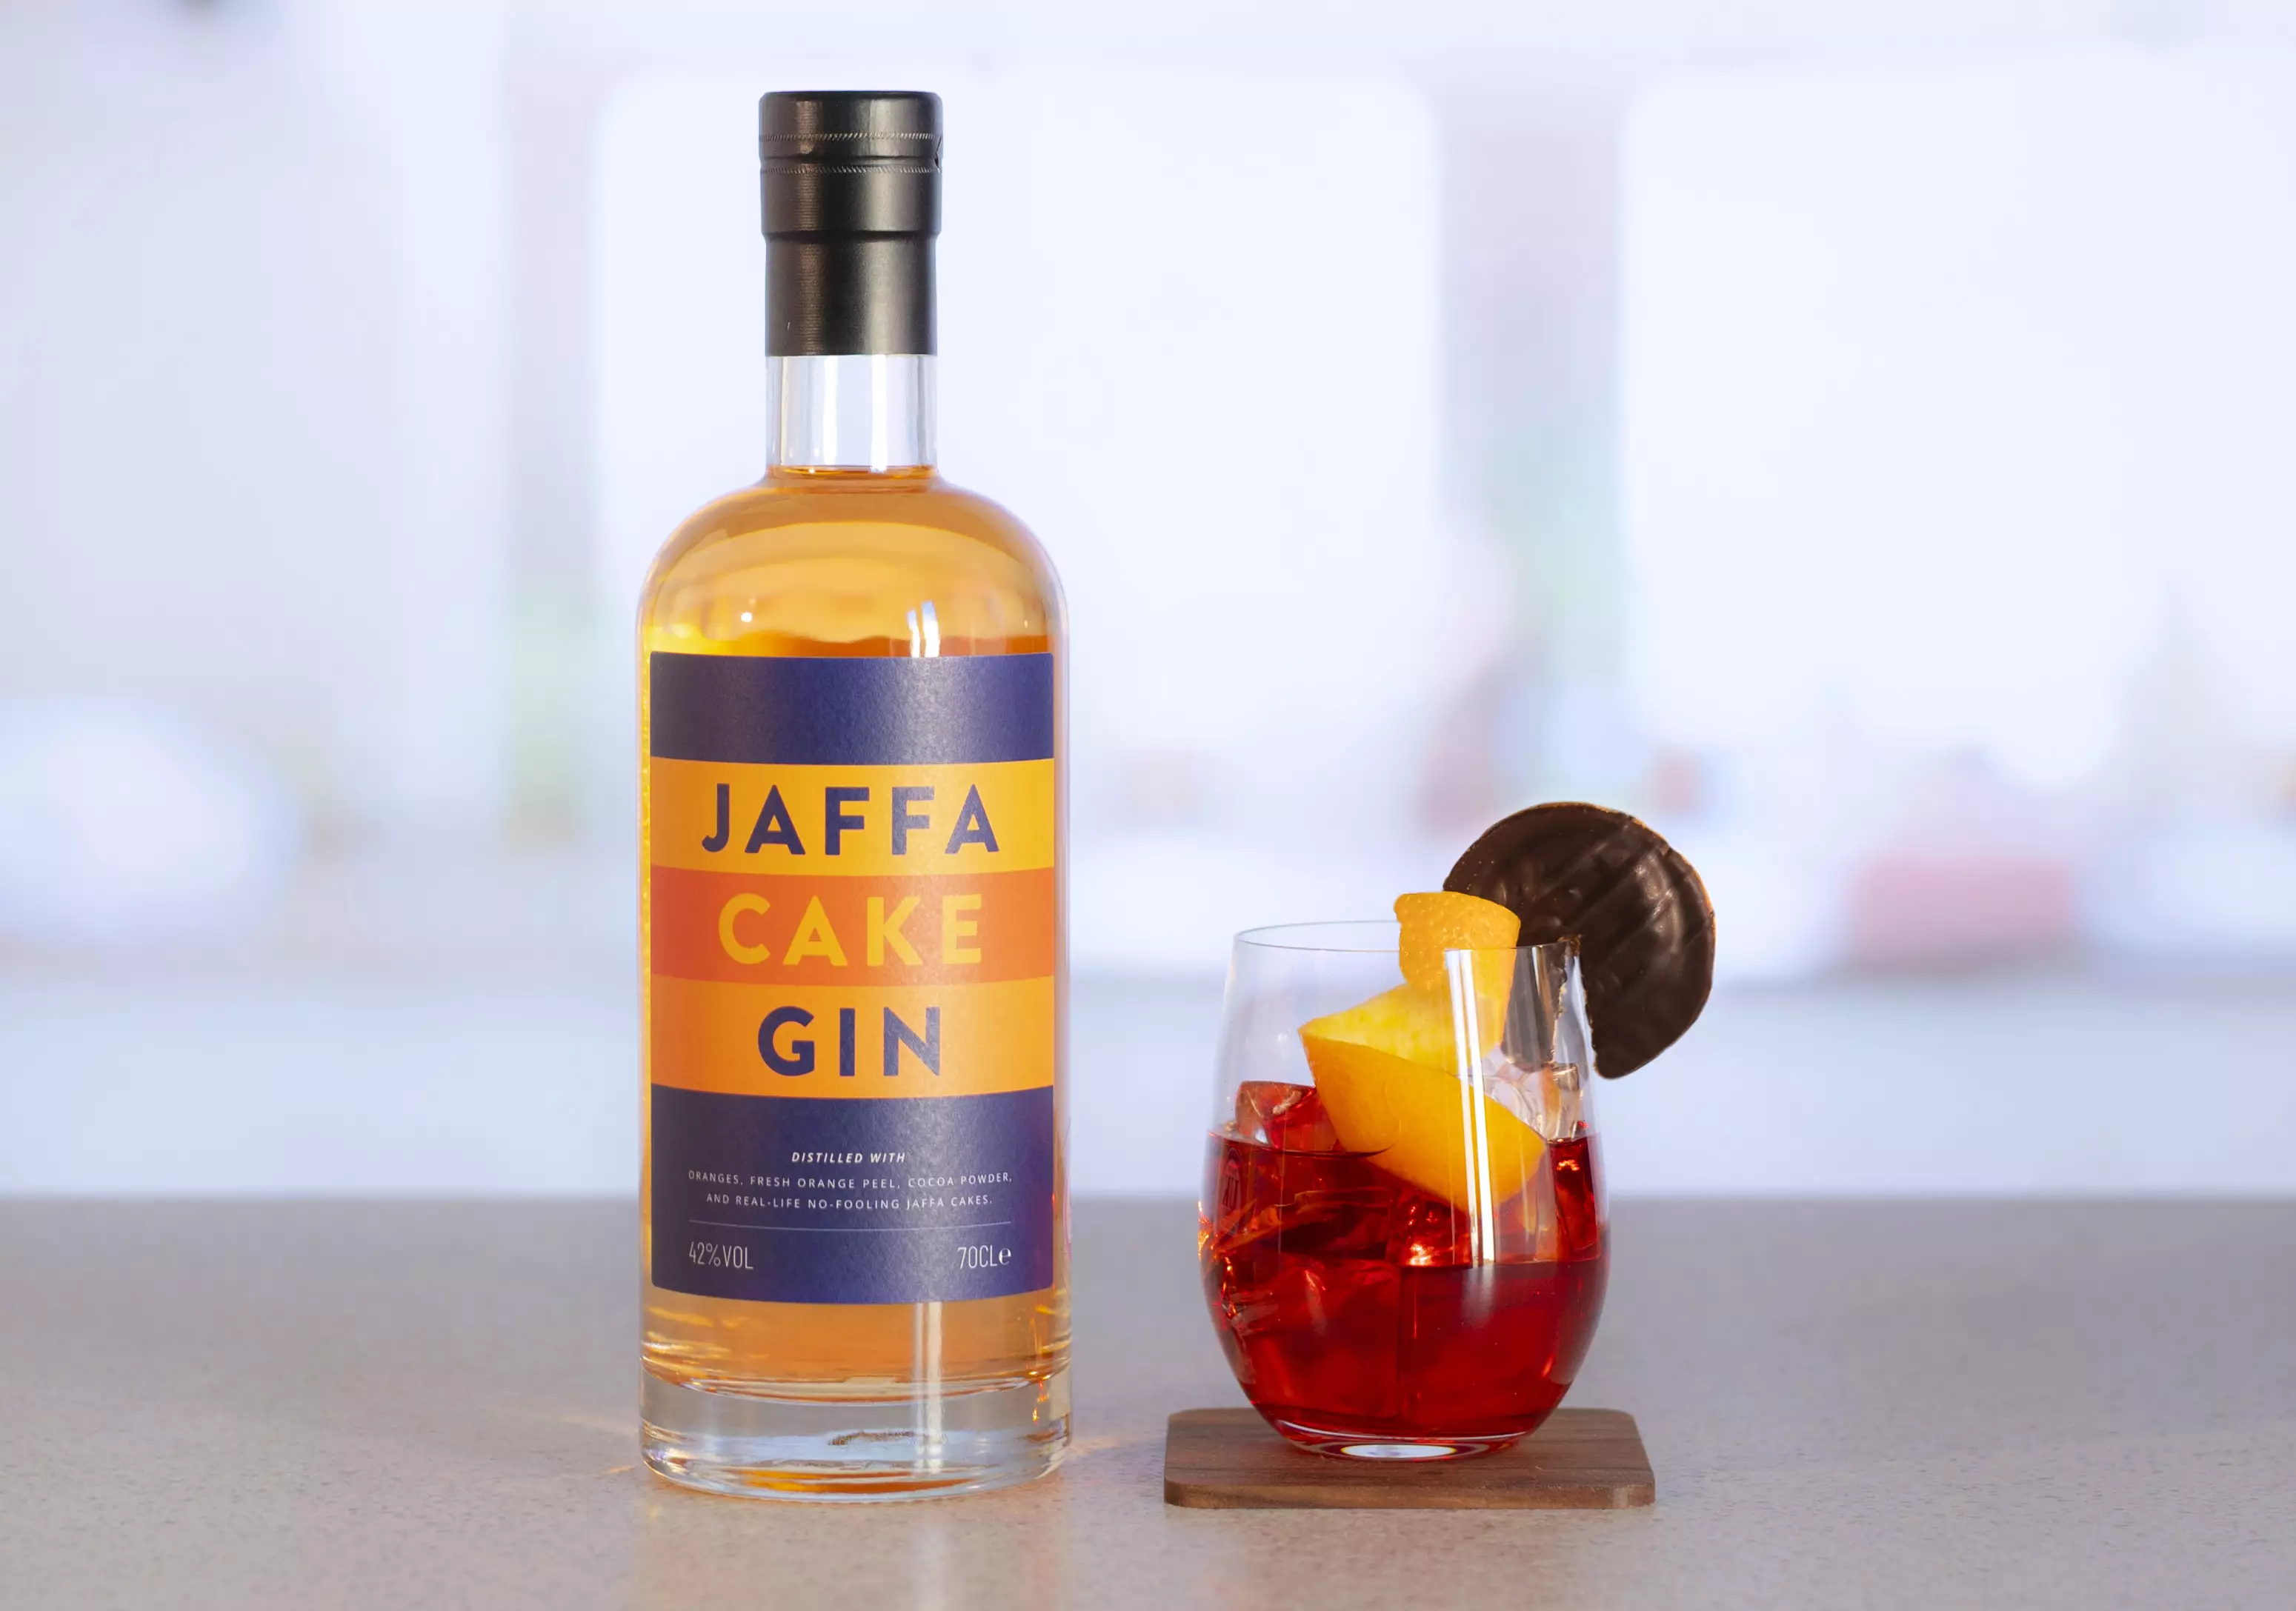 You can use the gin to create a Jaffa Cake Negroni Cocktail (